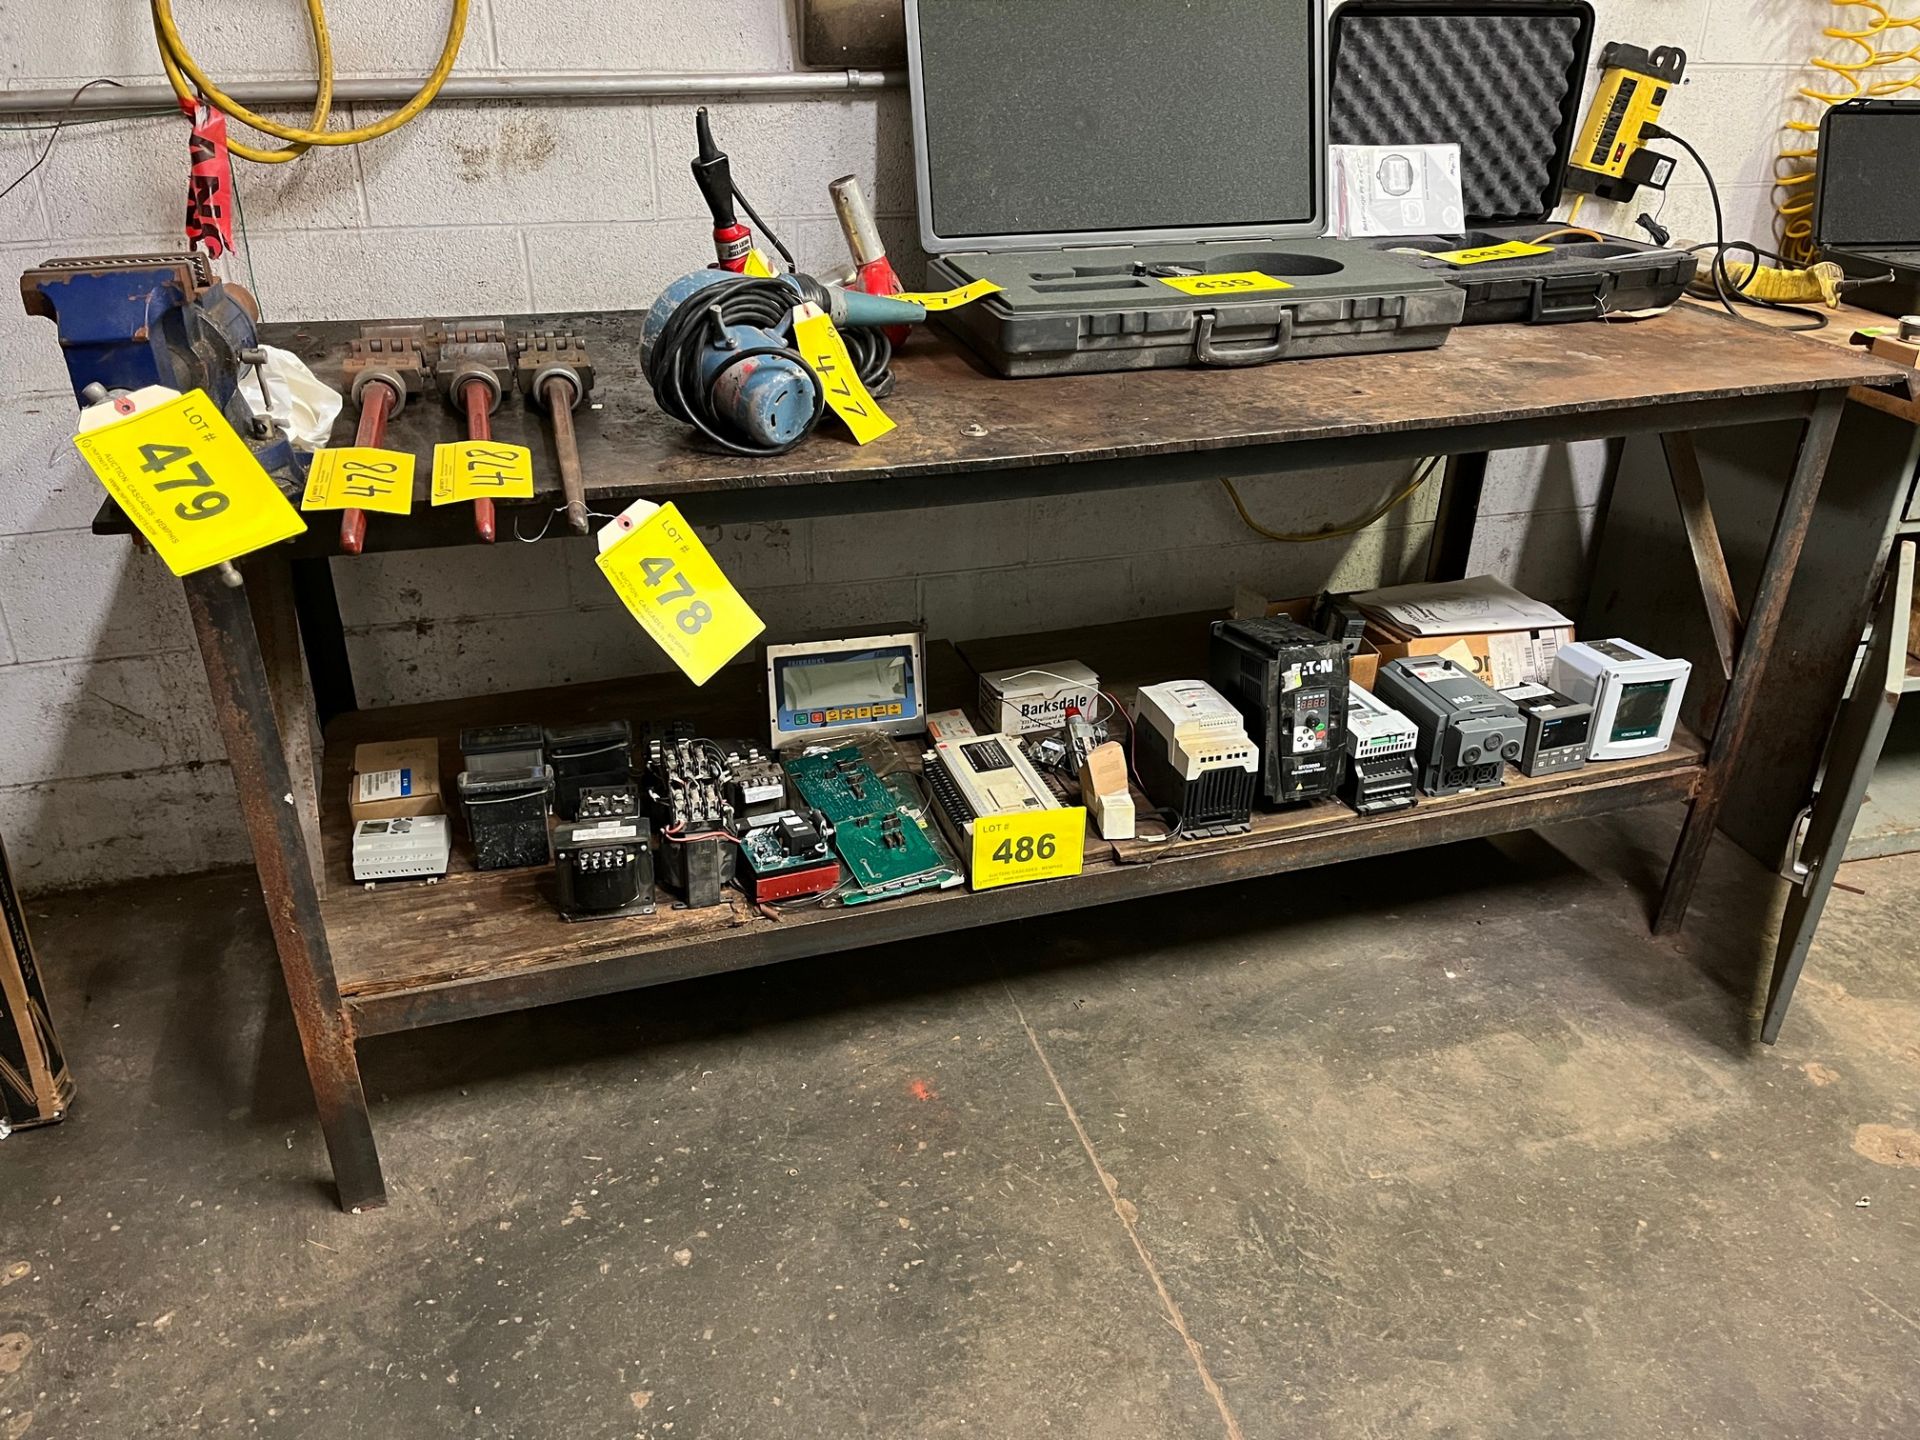 WELDING TABLE APPROX. 31"D X 7'L X 1/2" THICK PLATE TOP W/ 6" VISE (NO CONTENTS) (MAINTENANCE AREA